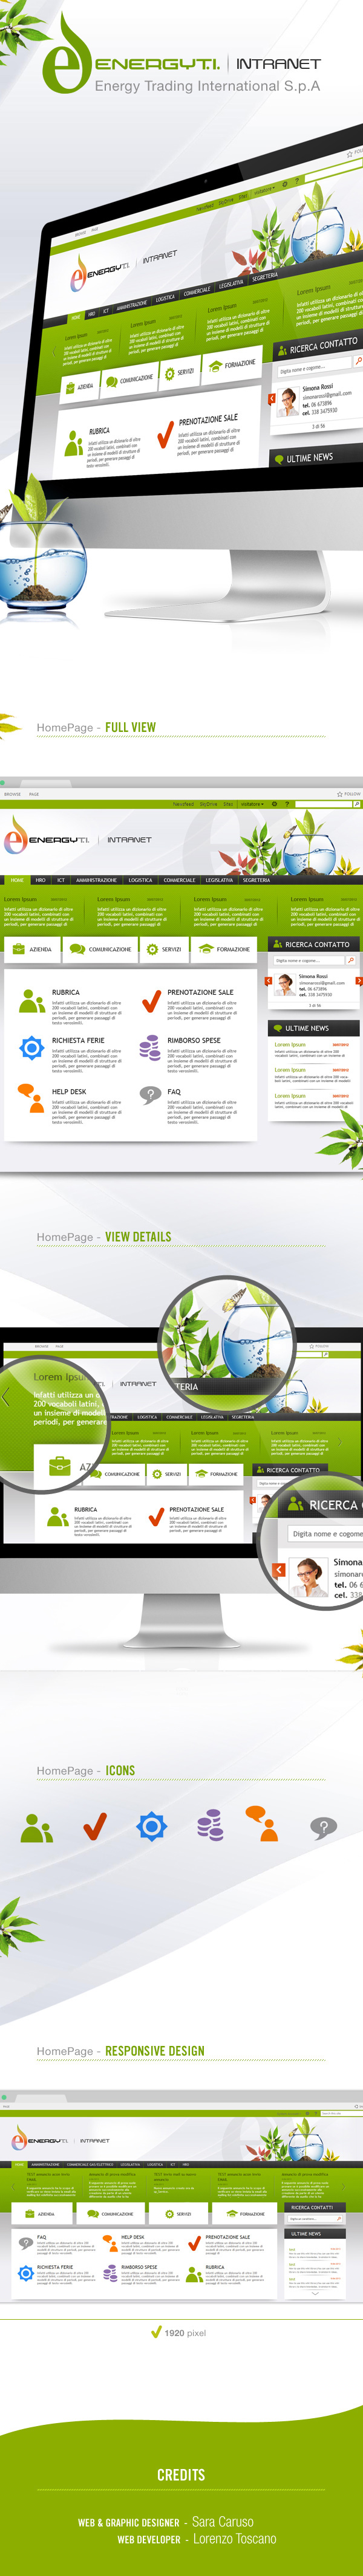 energy  Intranet  Ambient  green  web interface